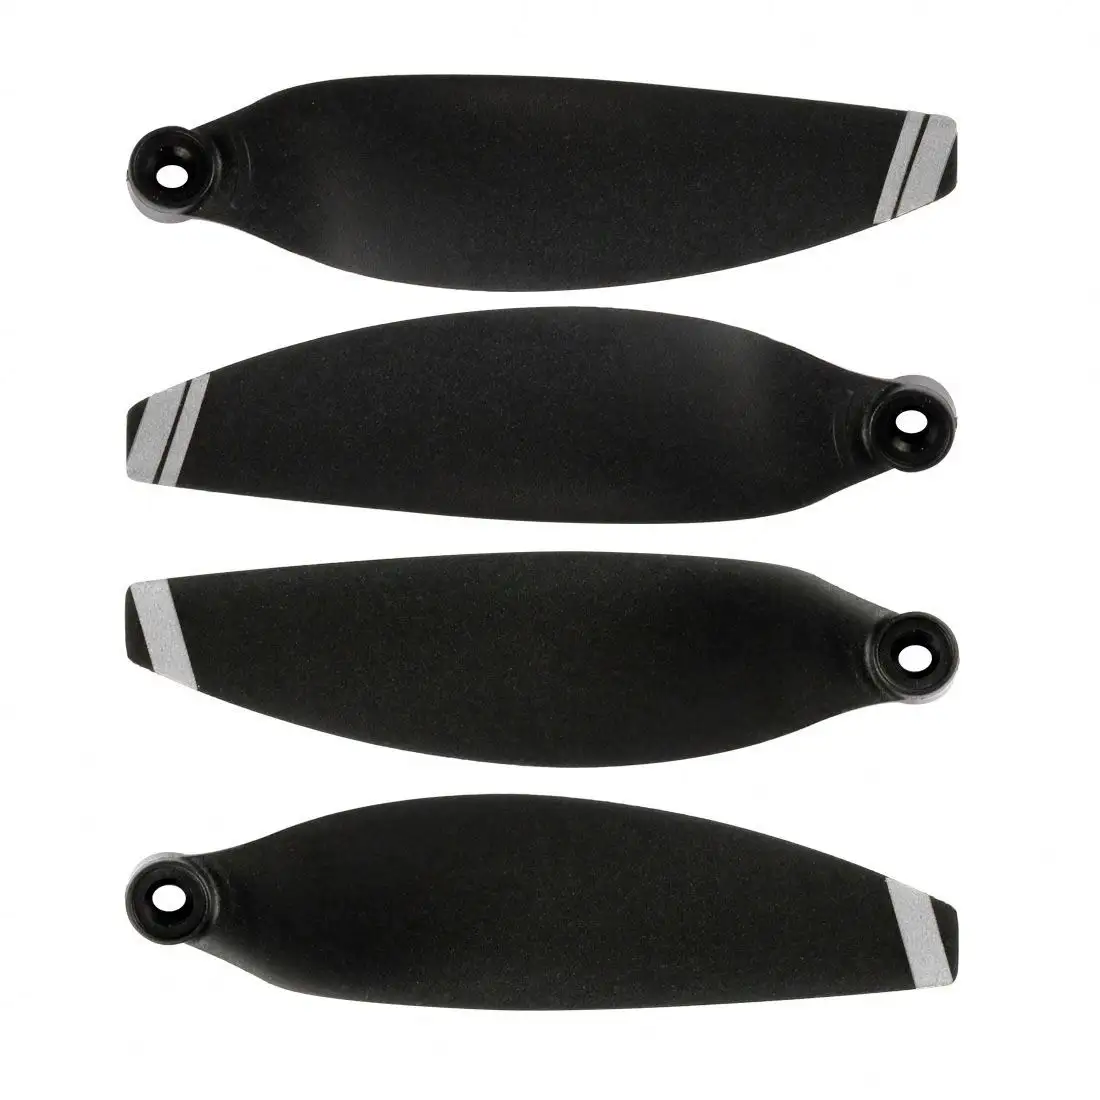 Flyxinsim OEM/ODM CW CCW Paddle DIY RC Aircraft Accessories Mini Drone Blades Propeller for Mavic